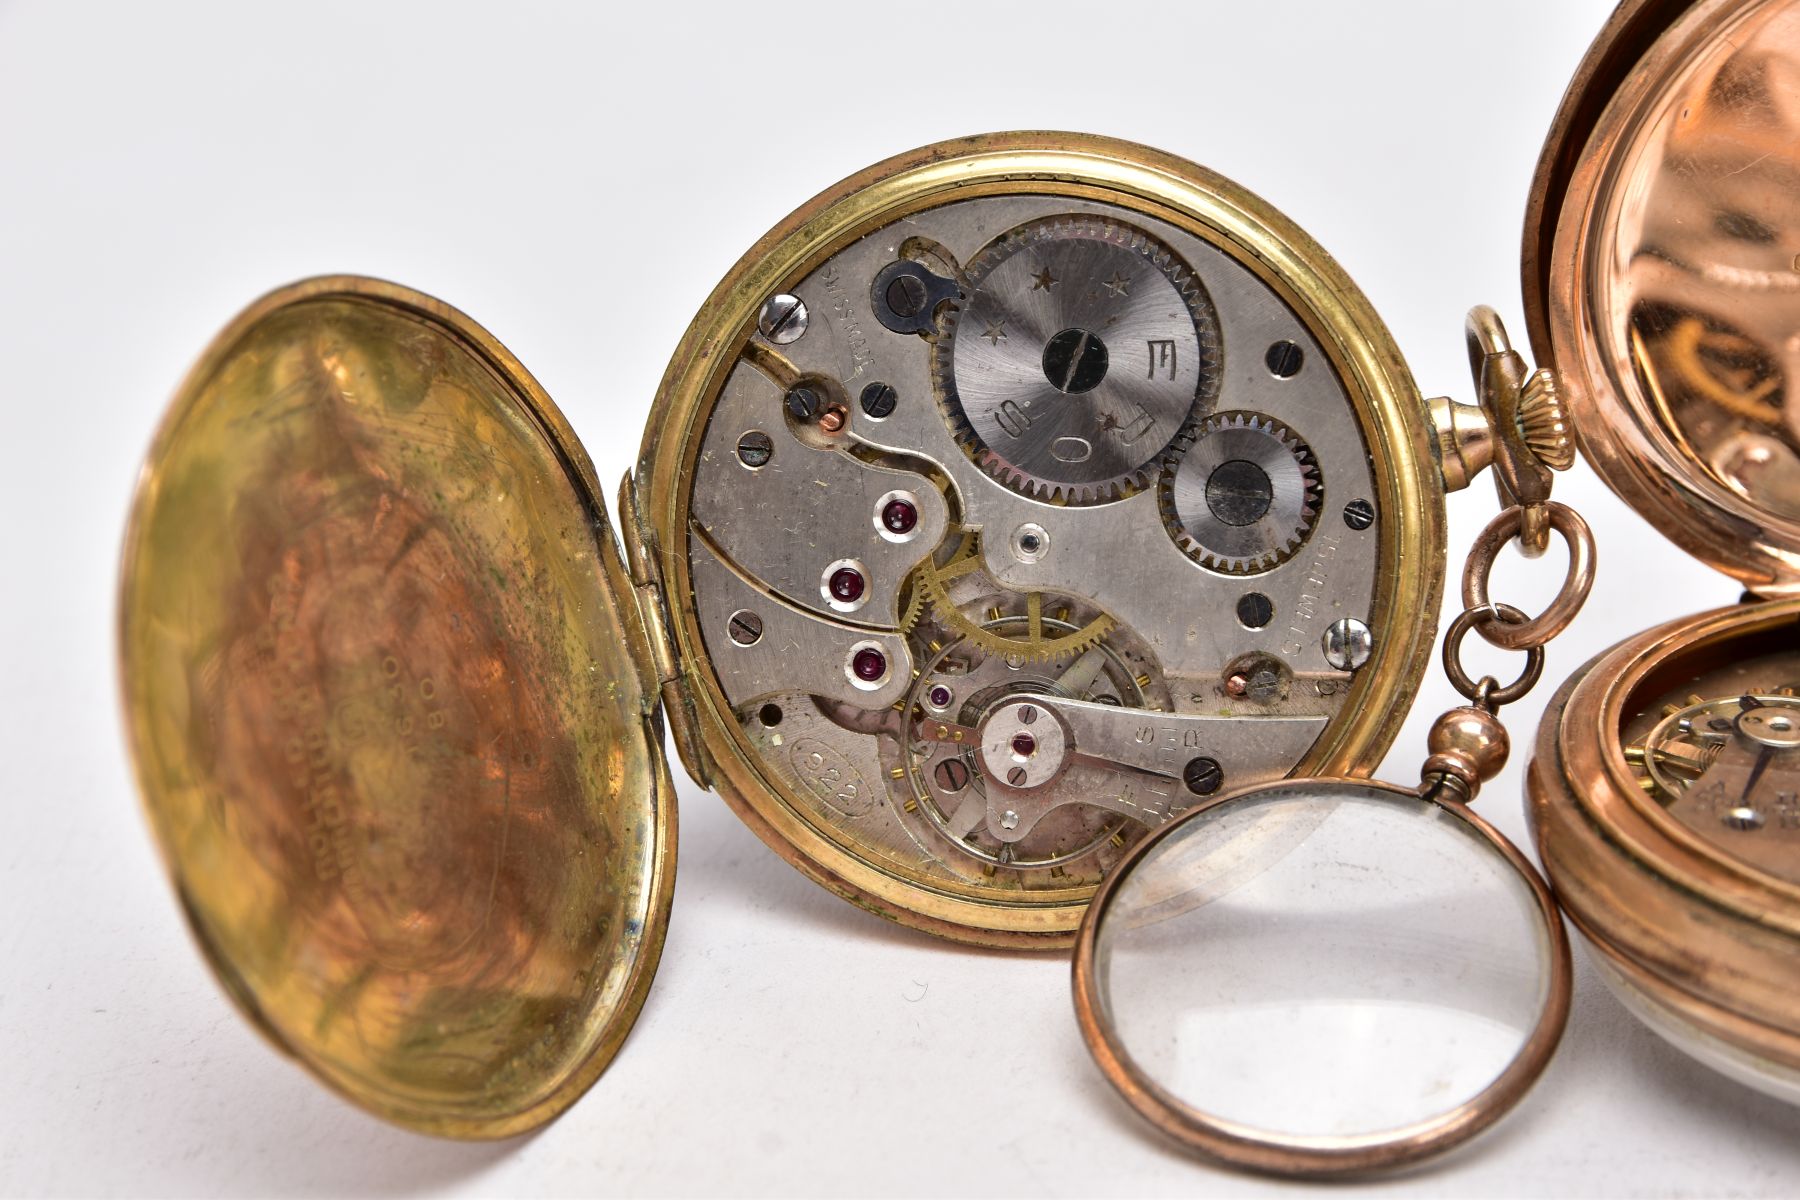 THREE GOLD PLATED OPEN FACED POCKET WATCHES, the first with a white dial signed 'Eros', Arabic - Image 7 of 8